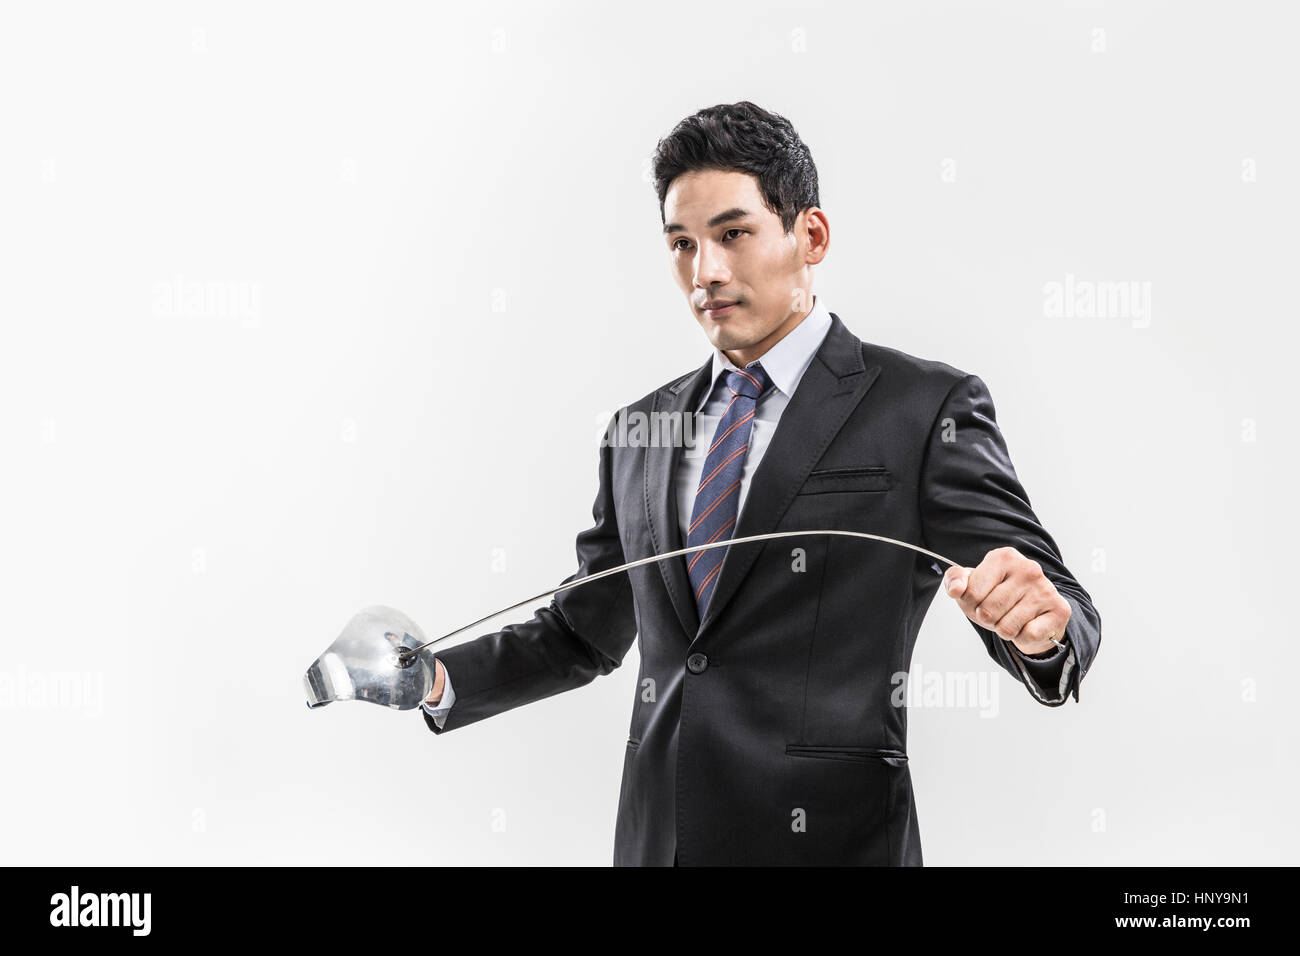 Businessman with fencing foil Stock Photo